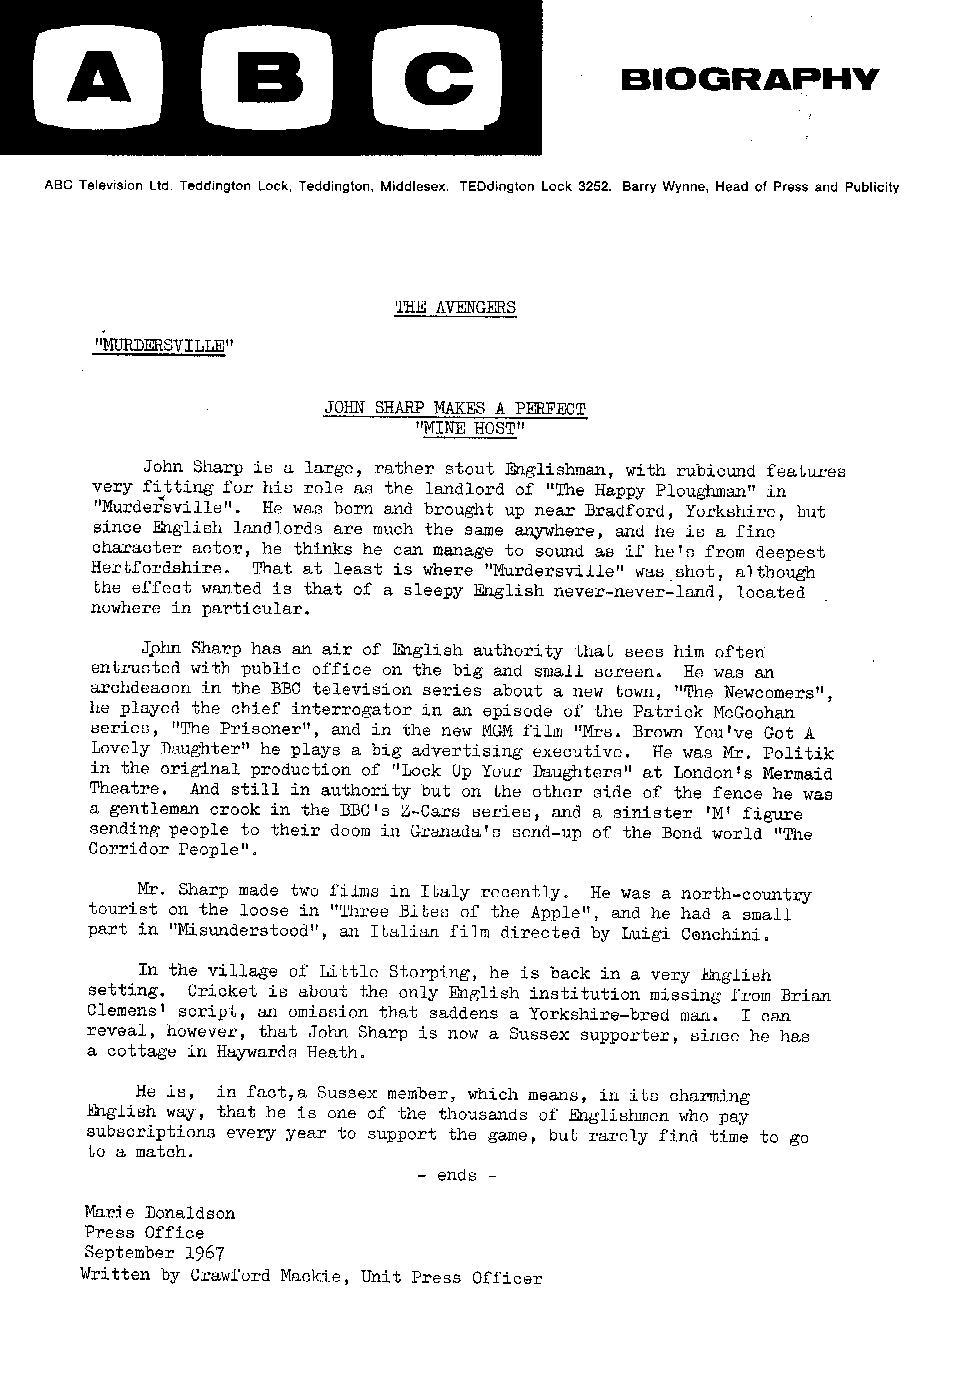 The Avengers - Murdersville press release - page two